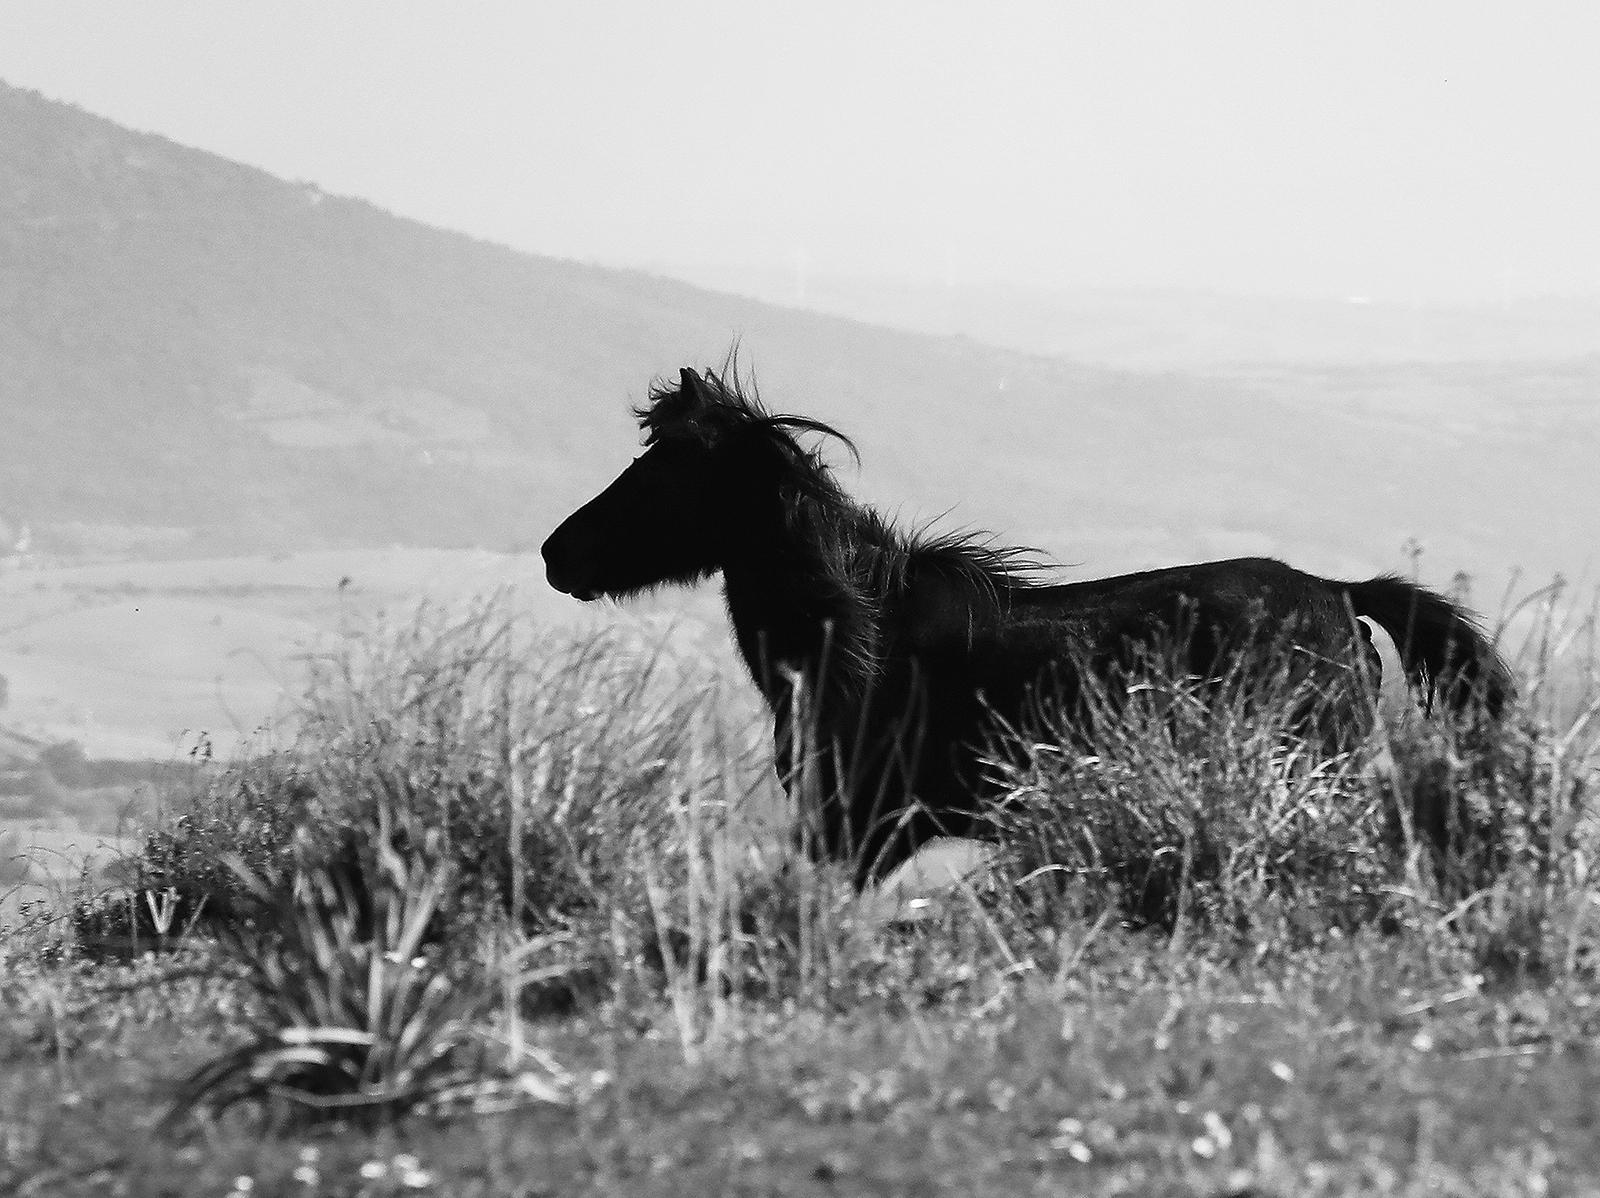 Cavallini 02 - Signed limited animal edition print, Black and white, wild horse - Photograph by Laurent Campus